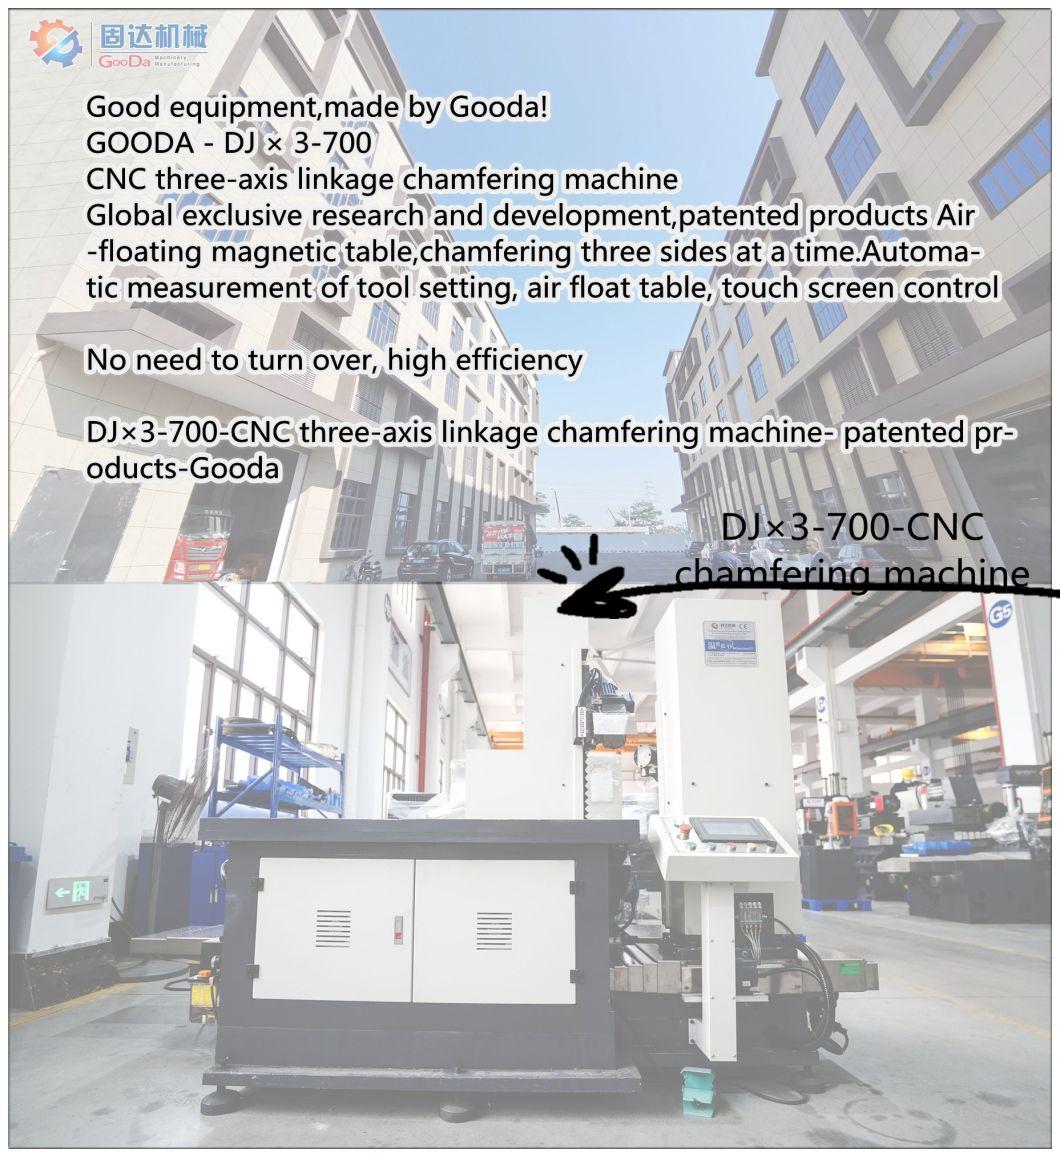 Gooda Automatically Measure&Touch Screen Control&Pneumatic and Electromagnetic Worktable CNC Trinity Ganged Chamfering Machine (DJX3-1200-700S)